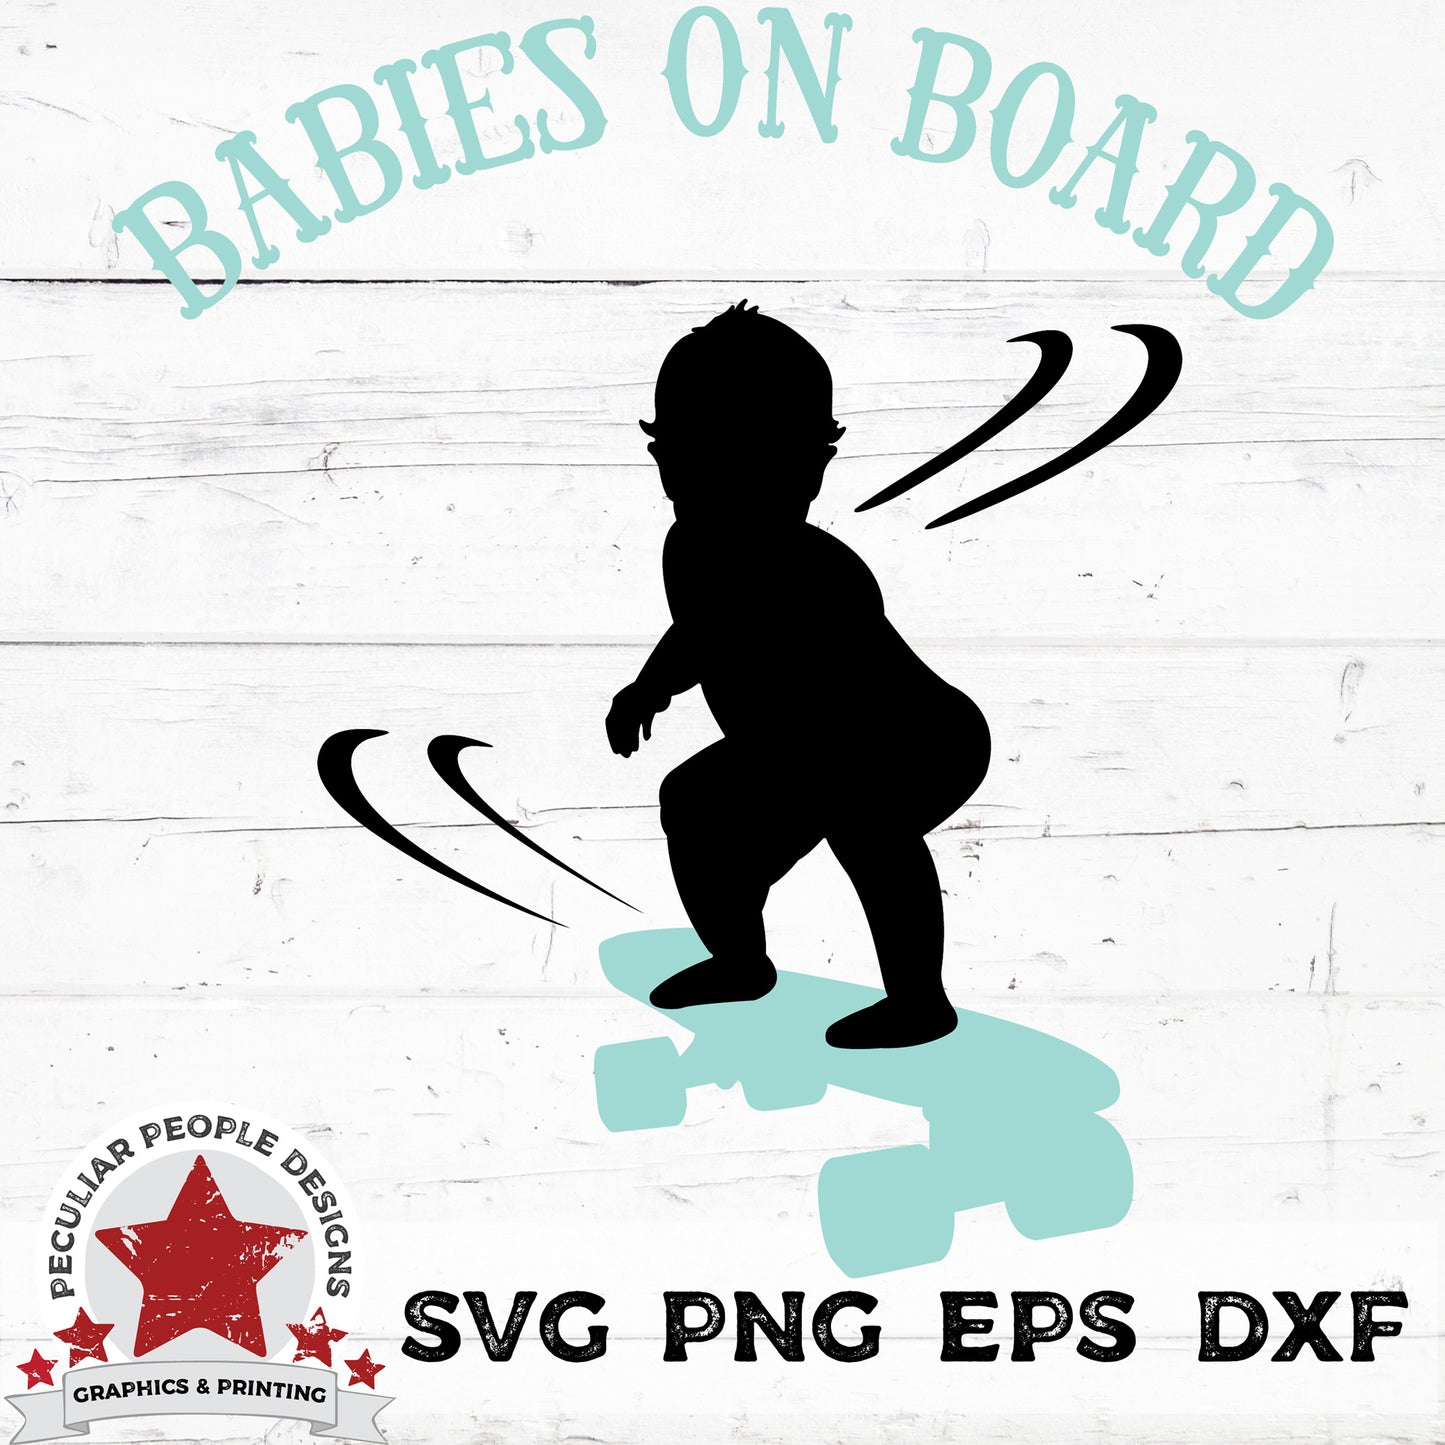 vector design of a baby on a skateboard with text reading "babies on board"